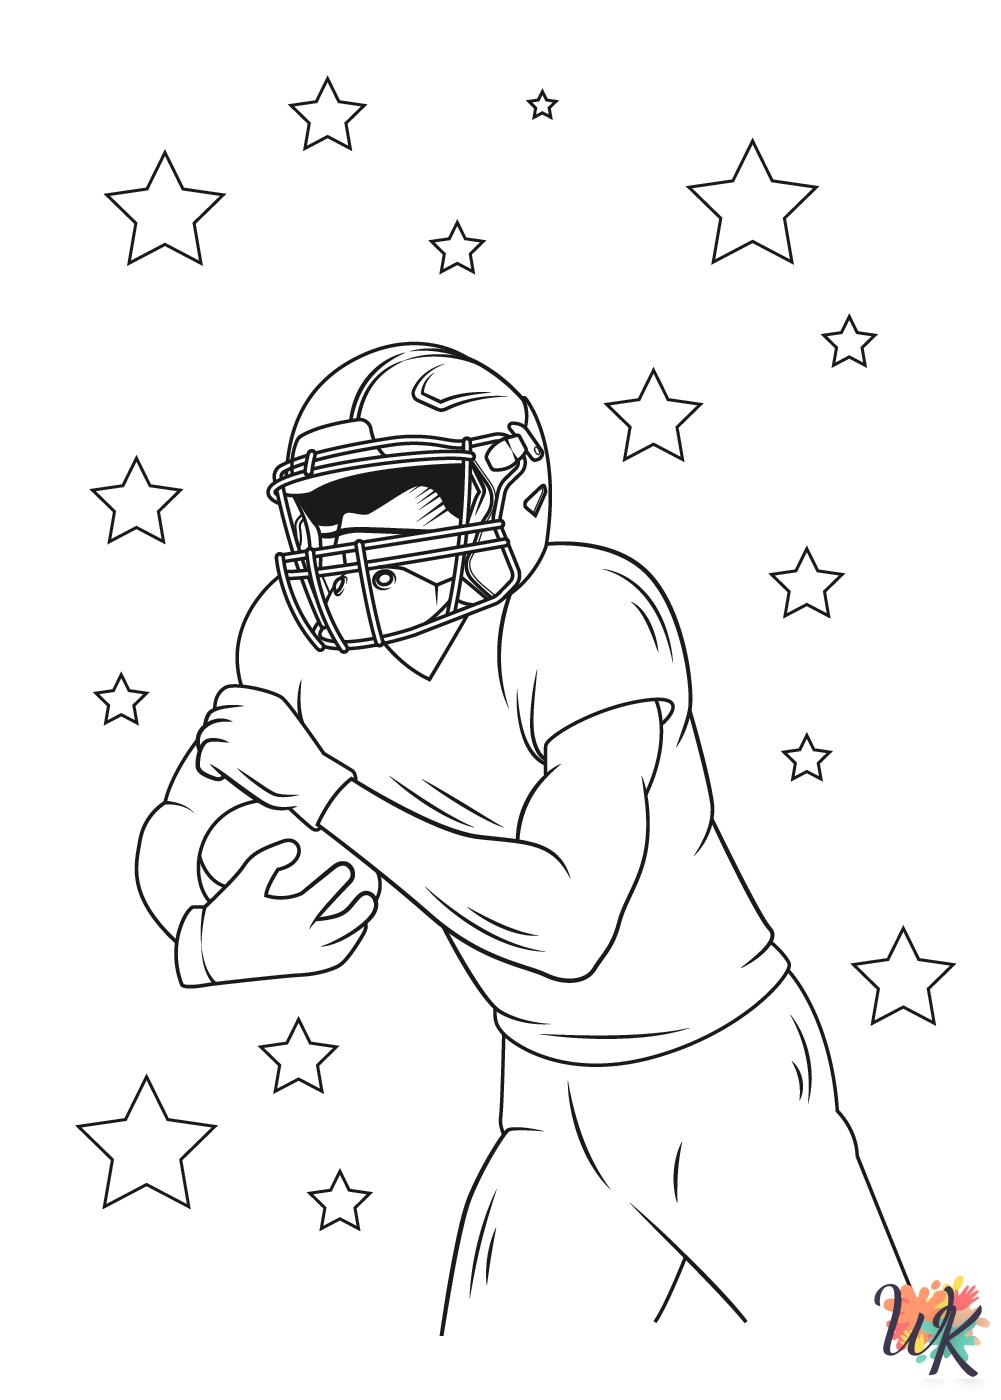 NFL coloring pages free